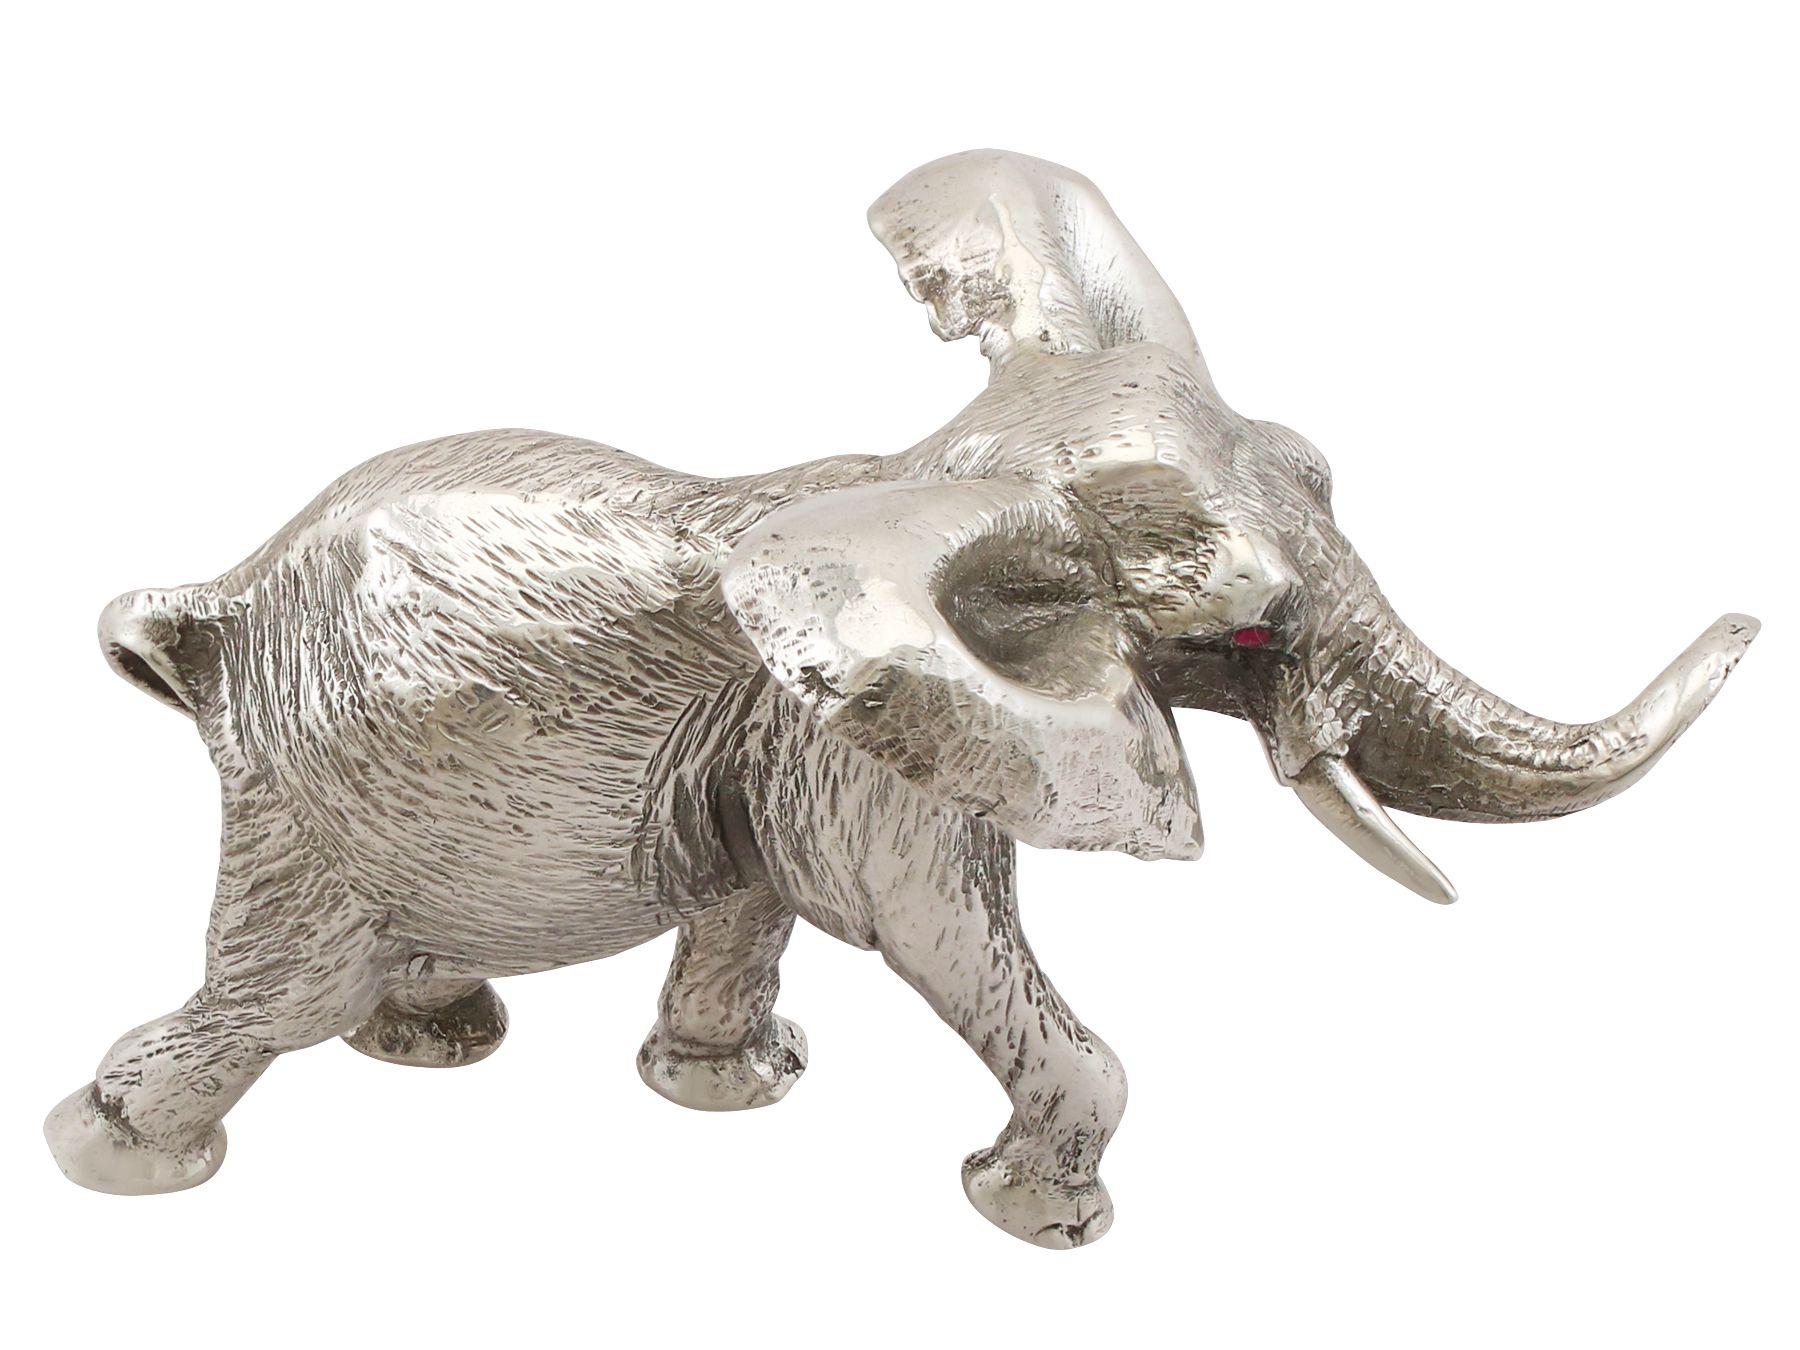 An exceptional, fine and impressive vintage silver model of an elephant; part of our ornamental silverware collection

This exceptional vintage cast sterling silver ornament has been realistically modelled in the form of an elephant.

This